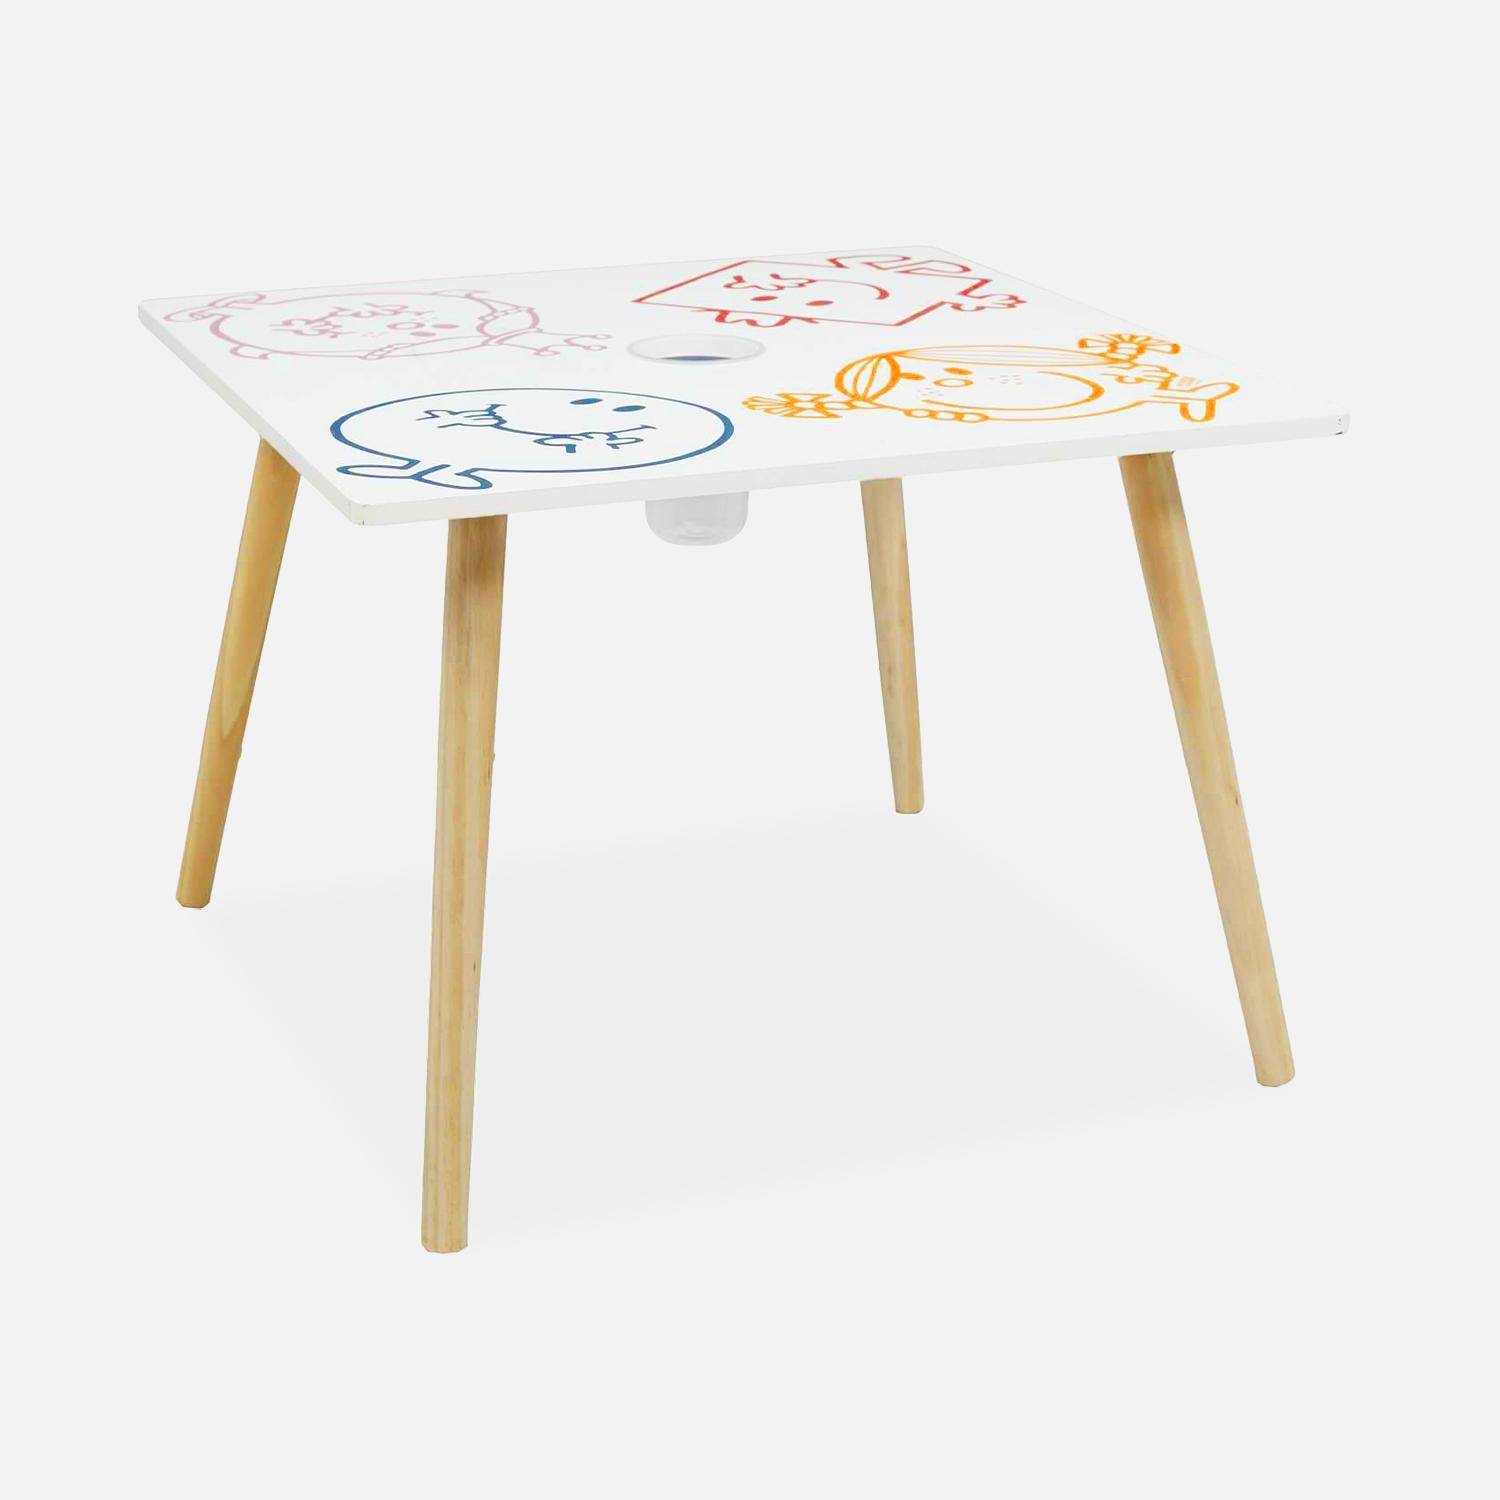 Table with pencil cup for children in the Mr. Men & Little Miss collection,sweeek,Photo3